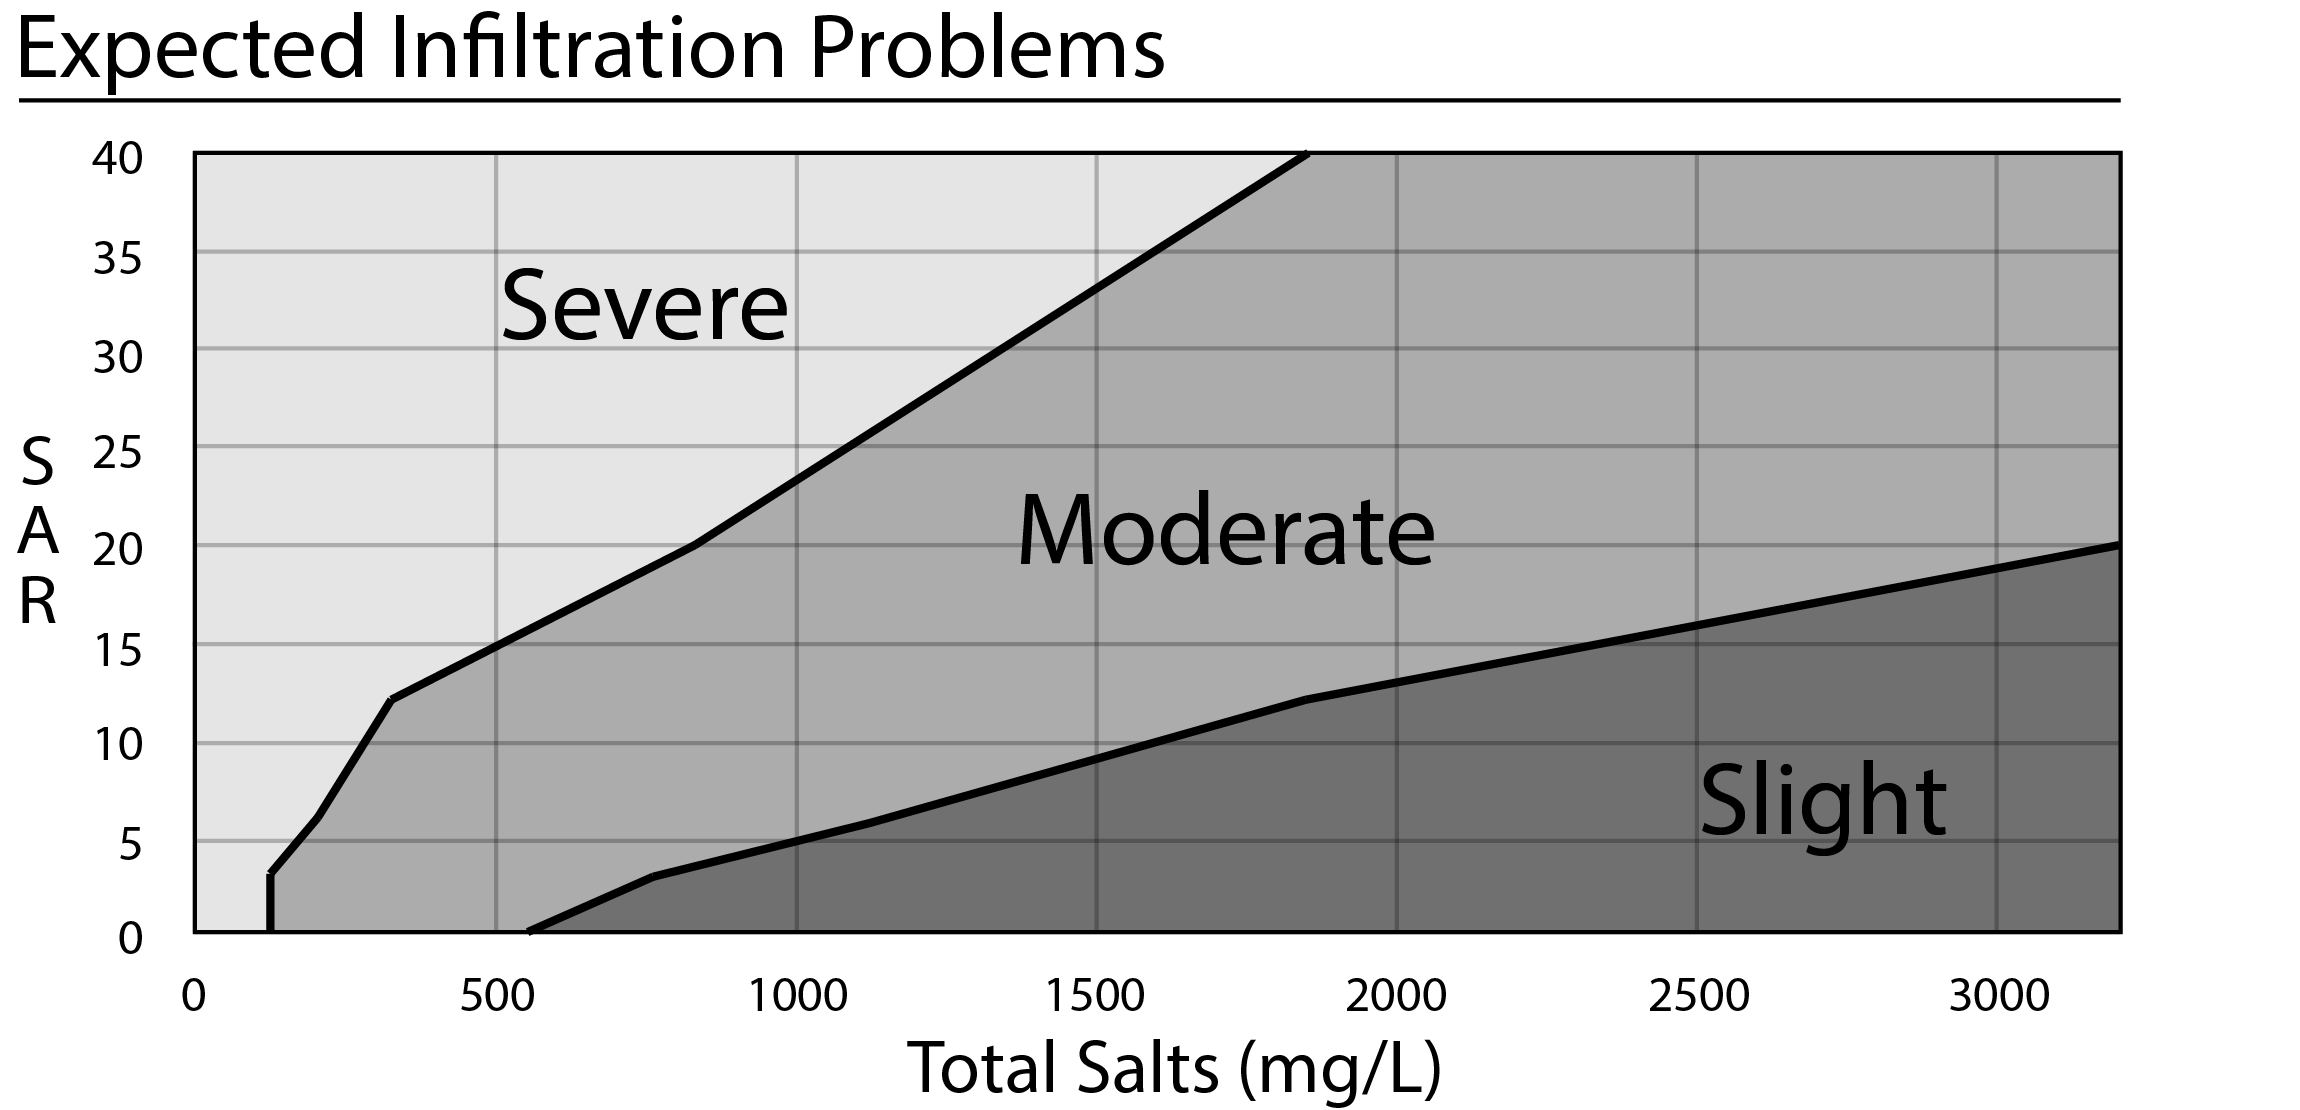 Total salts and SAR are used together to predict the effect of irrigation water on infiltration hazard.